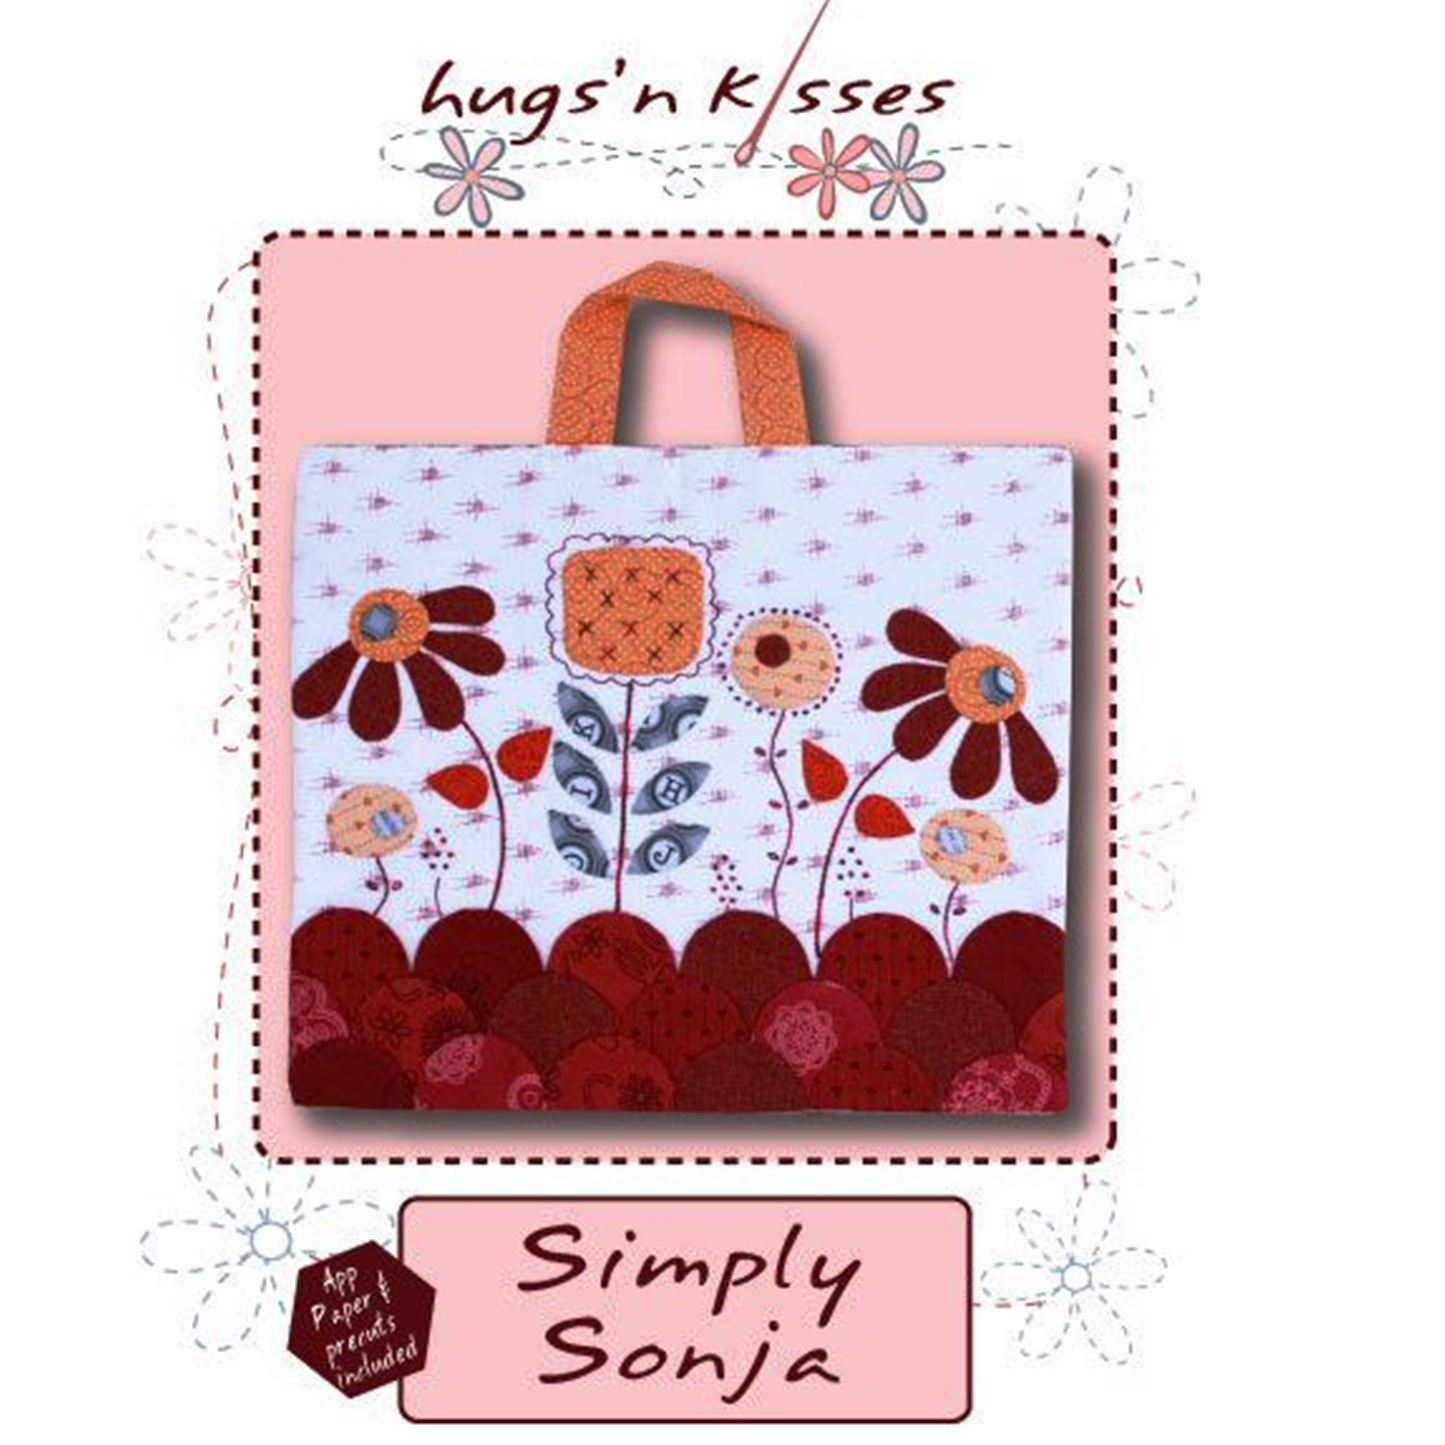 Simply Sonja zipper pouch project bag English Paper Pieced applique embroidery Hugs 'N Kisses pattern